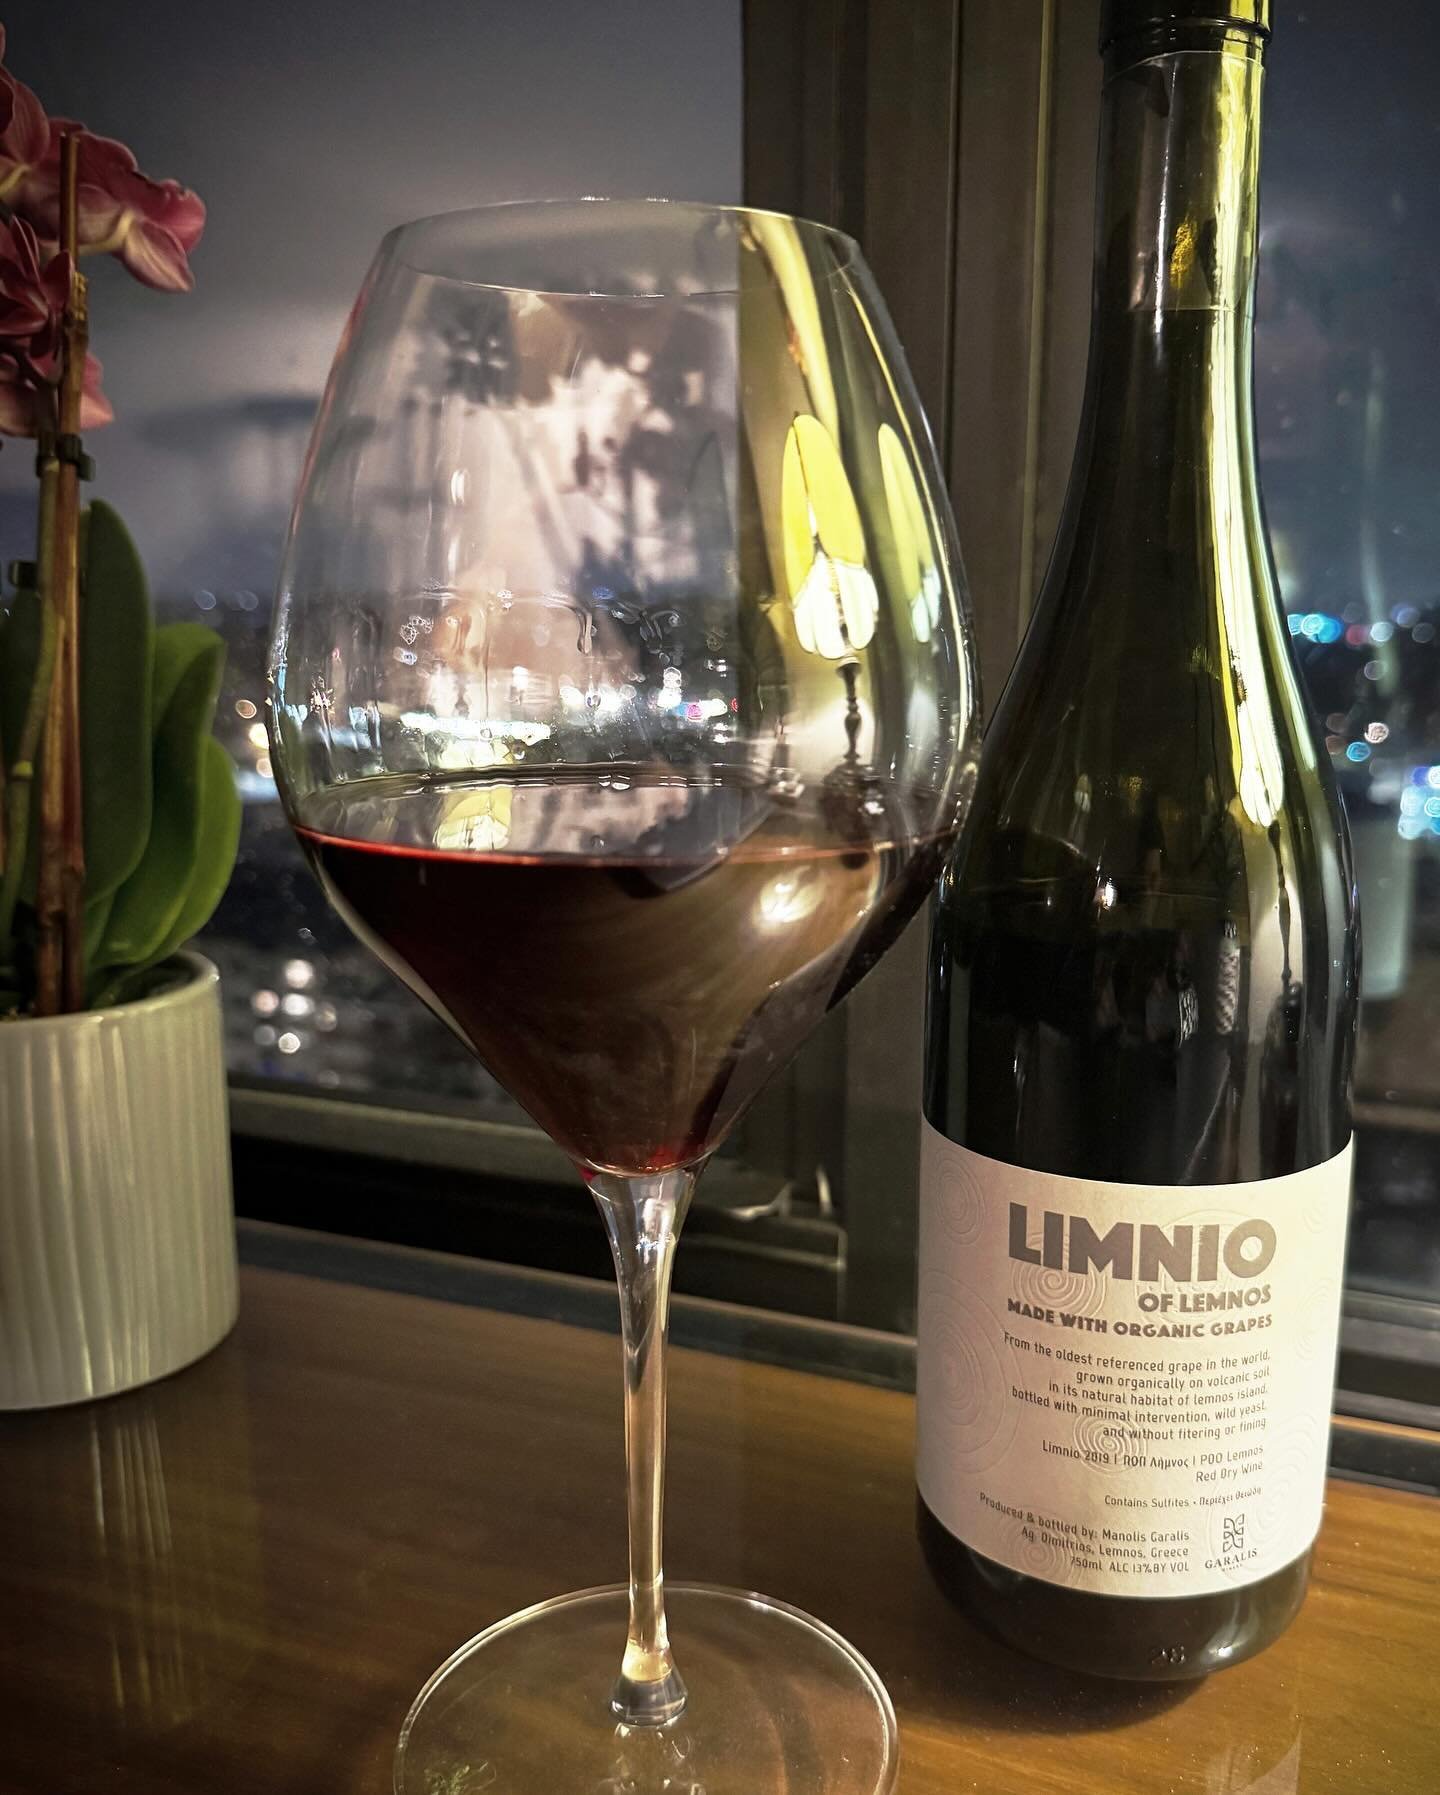 Okay, here&rsquo;s another wine tasting, WSET style! I had never heard of this grape before, Limnio. It&rsquo;s the oldest referenced wine grape in the world. Organic, grown on volcanic soil on Lemnos Island in Greece. It drinks a lot like a Syrah!

